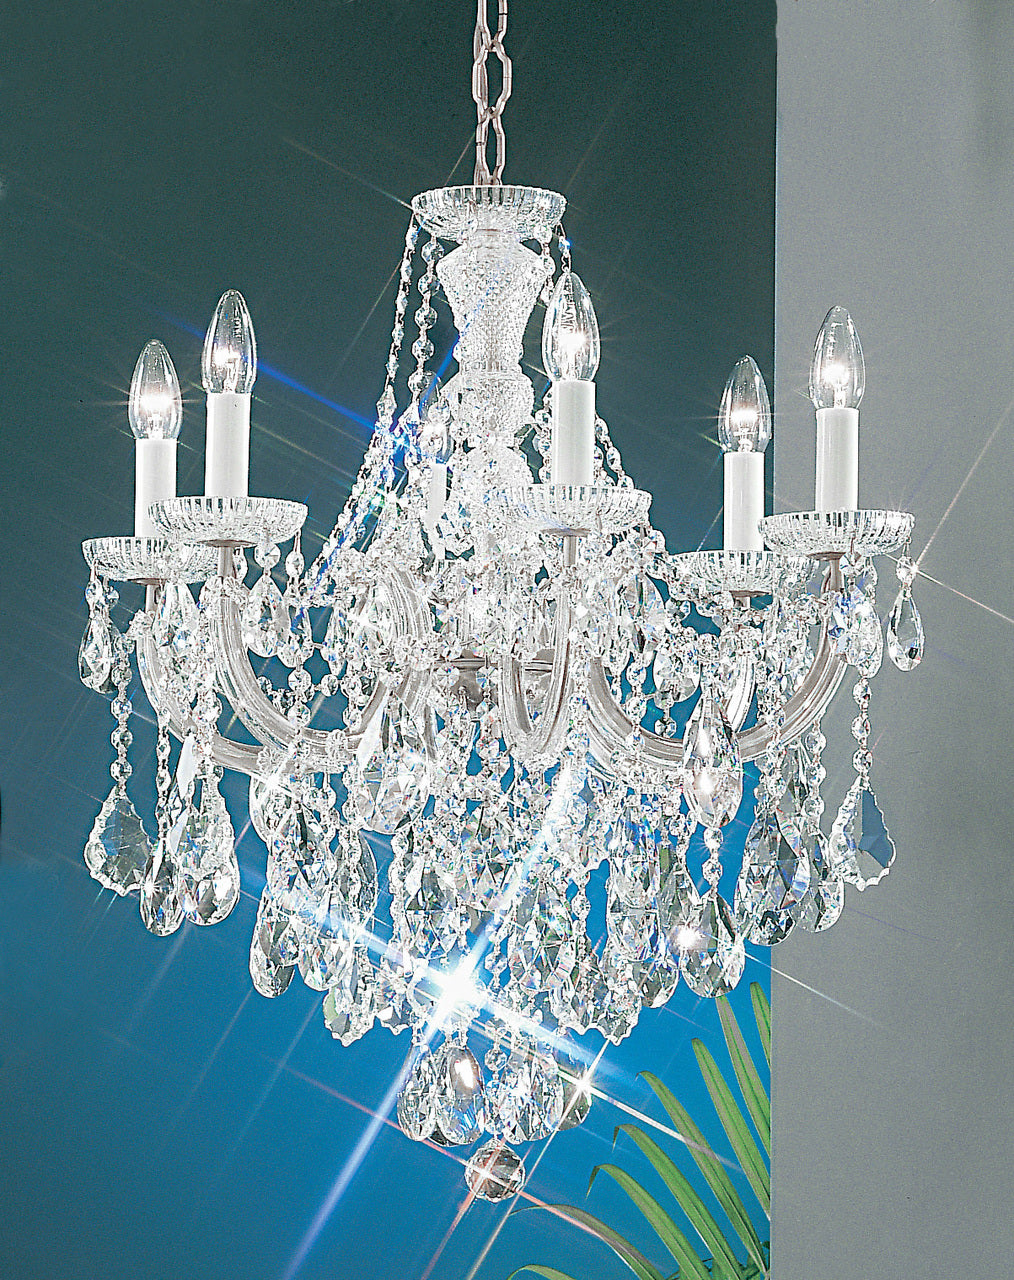 Classic Lighting 8121 CH S Maria Theresa Traditional Crystal Chandelier in Chrome (Imported from Italy)